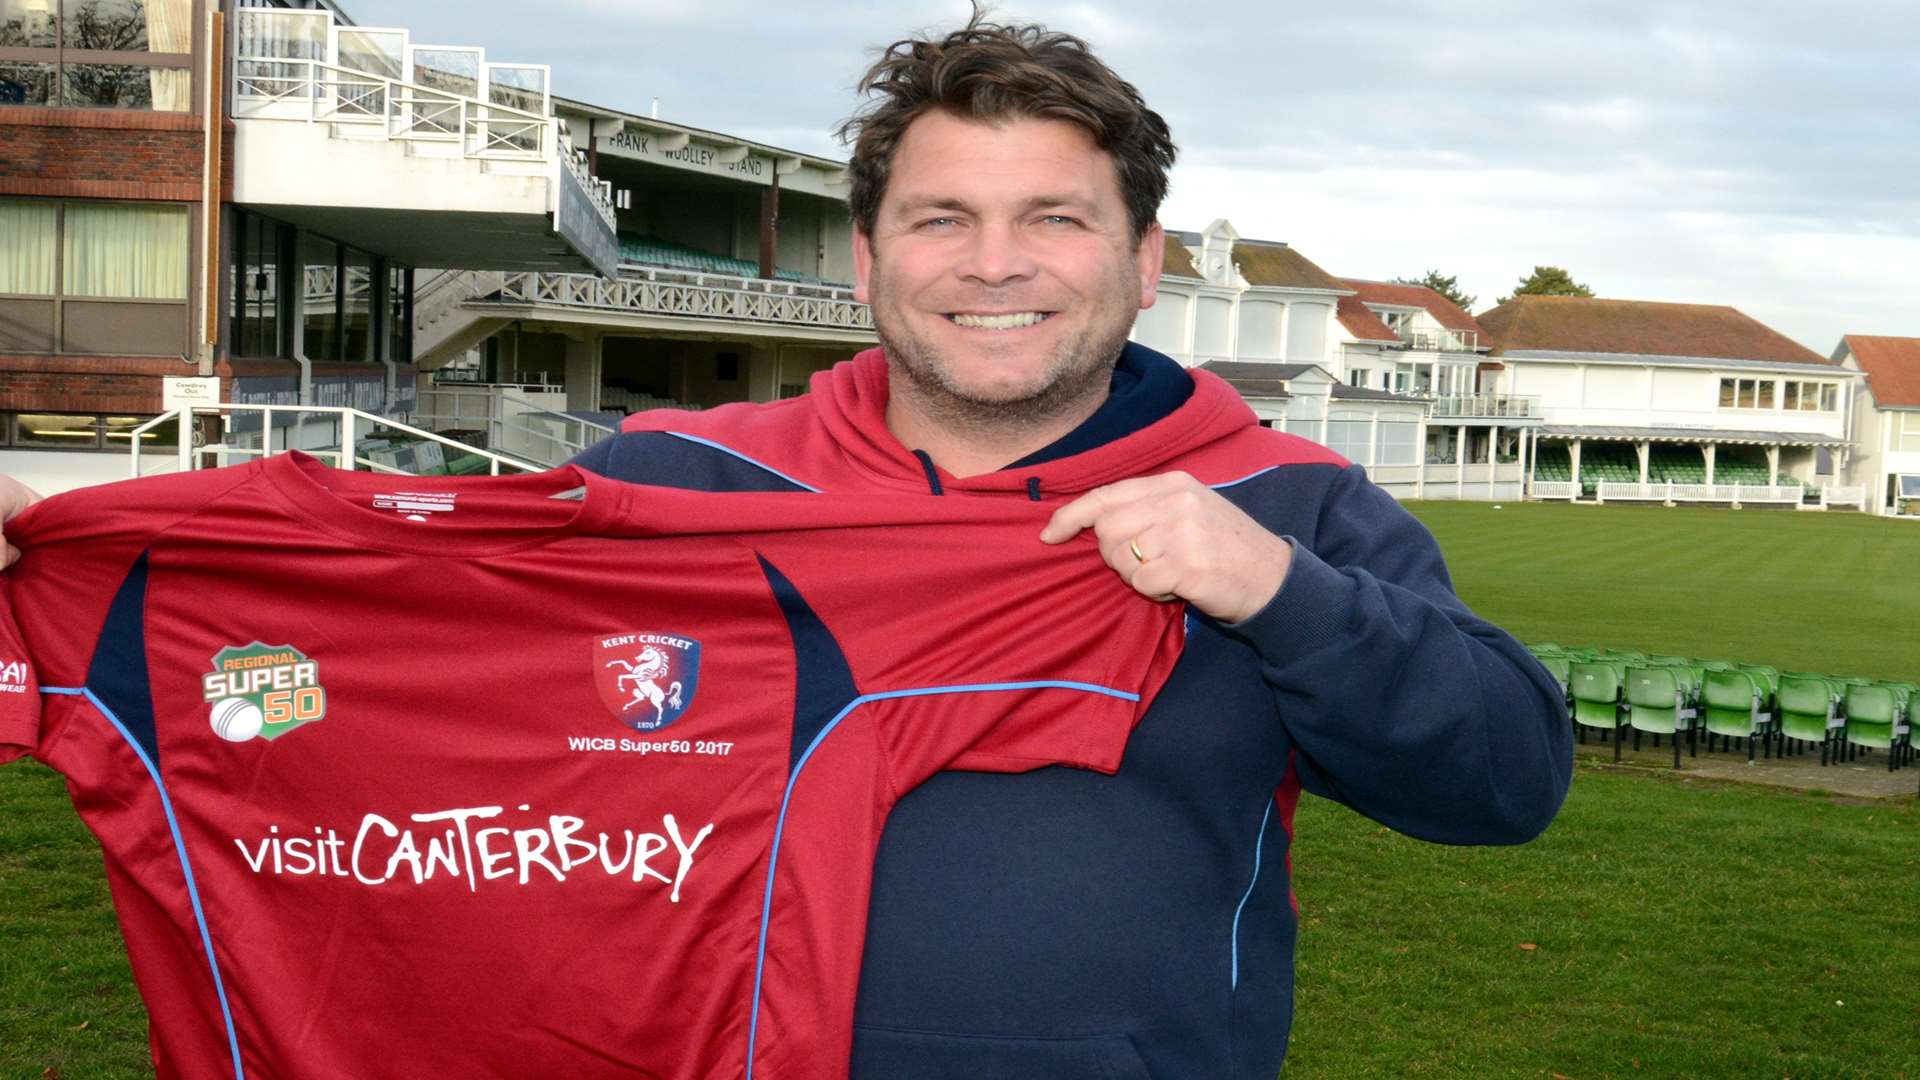 Kent's new coach Matt Walker shows off Kent’s tour training tops sponsored by Visit Canterbury Picture: Oyster Bay Photography